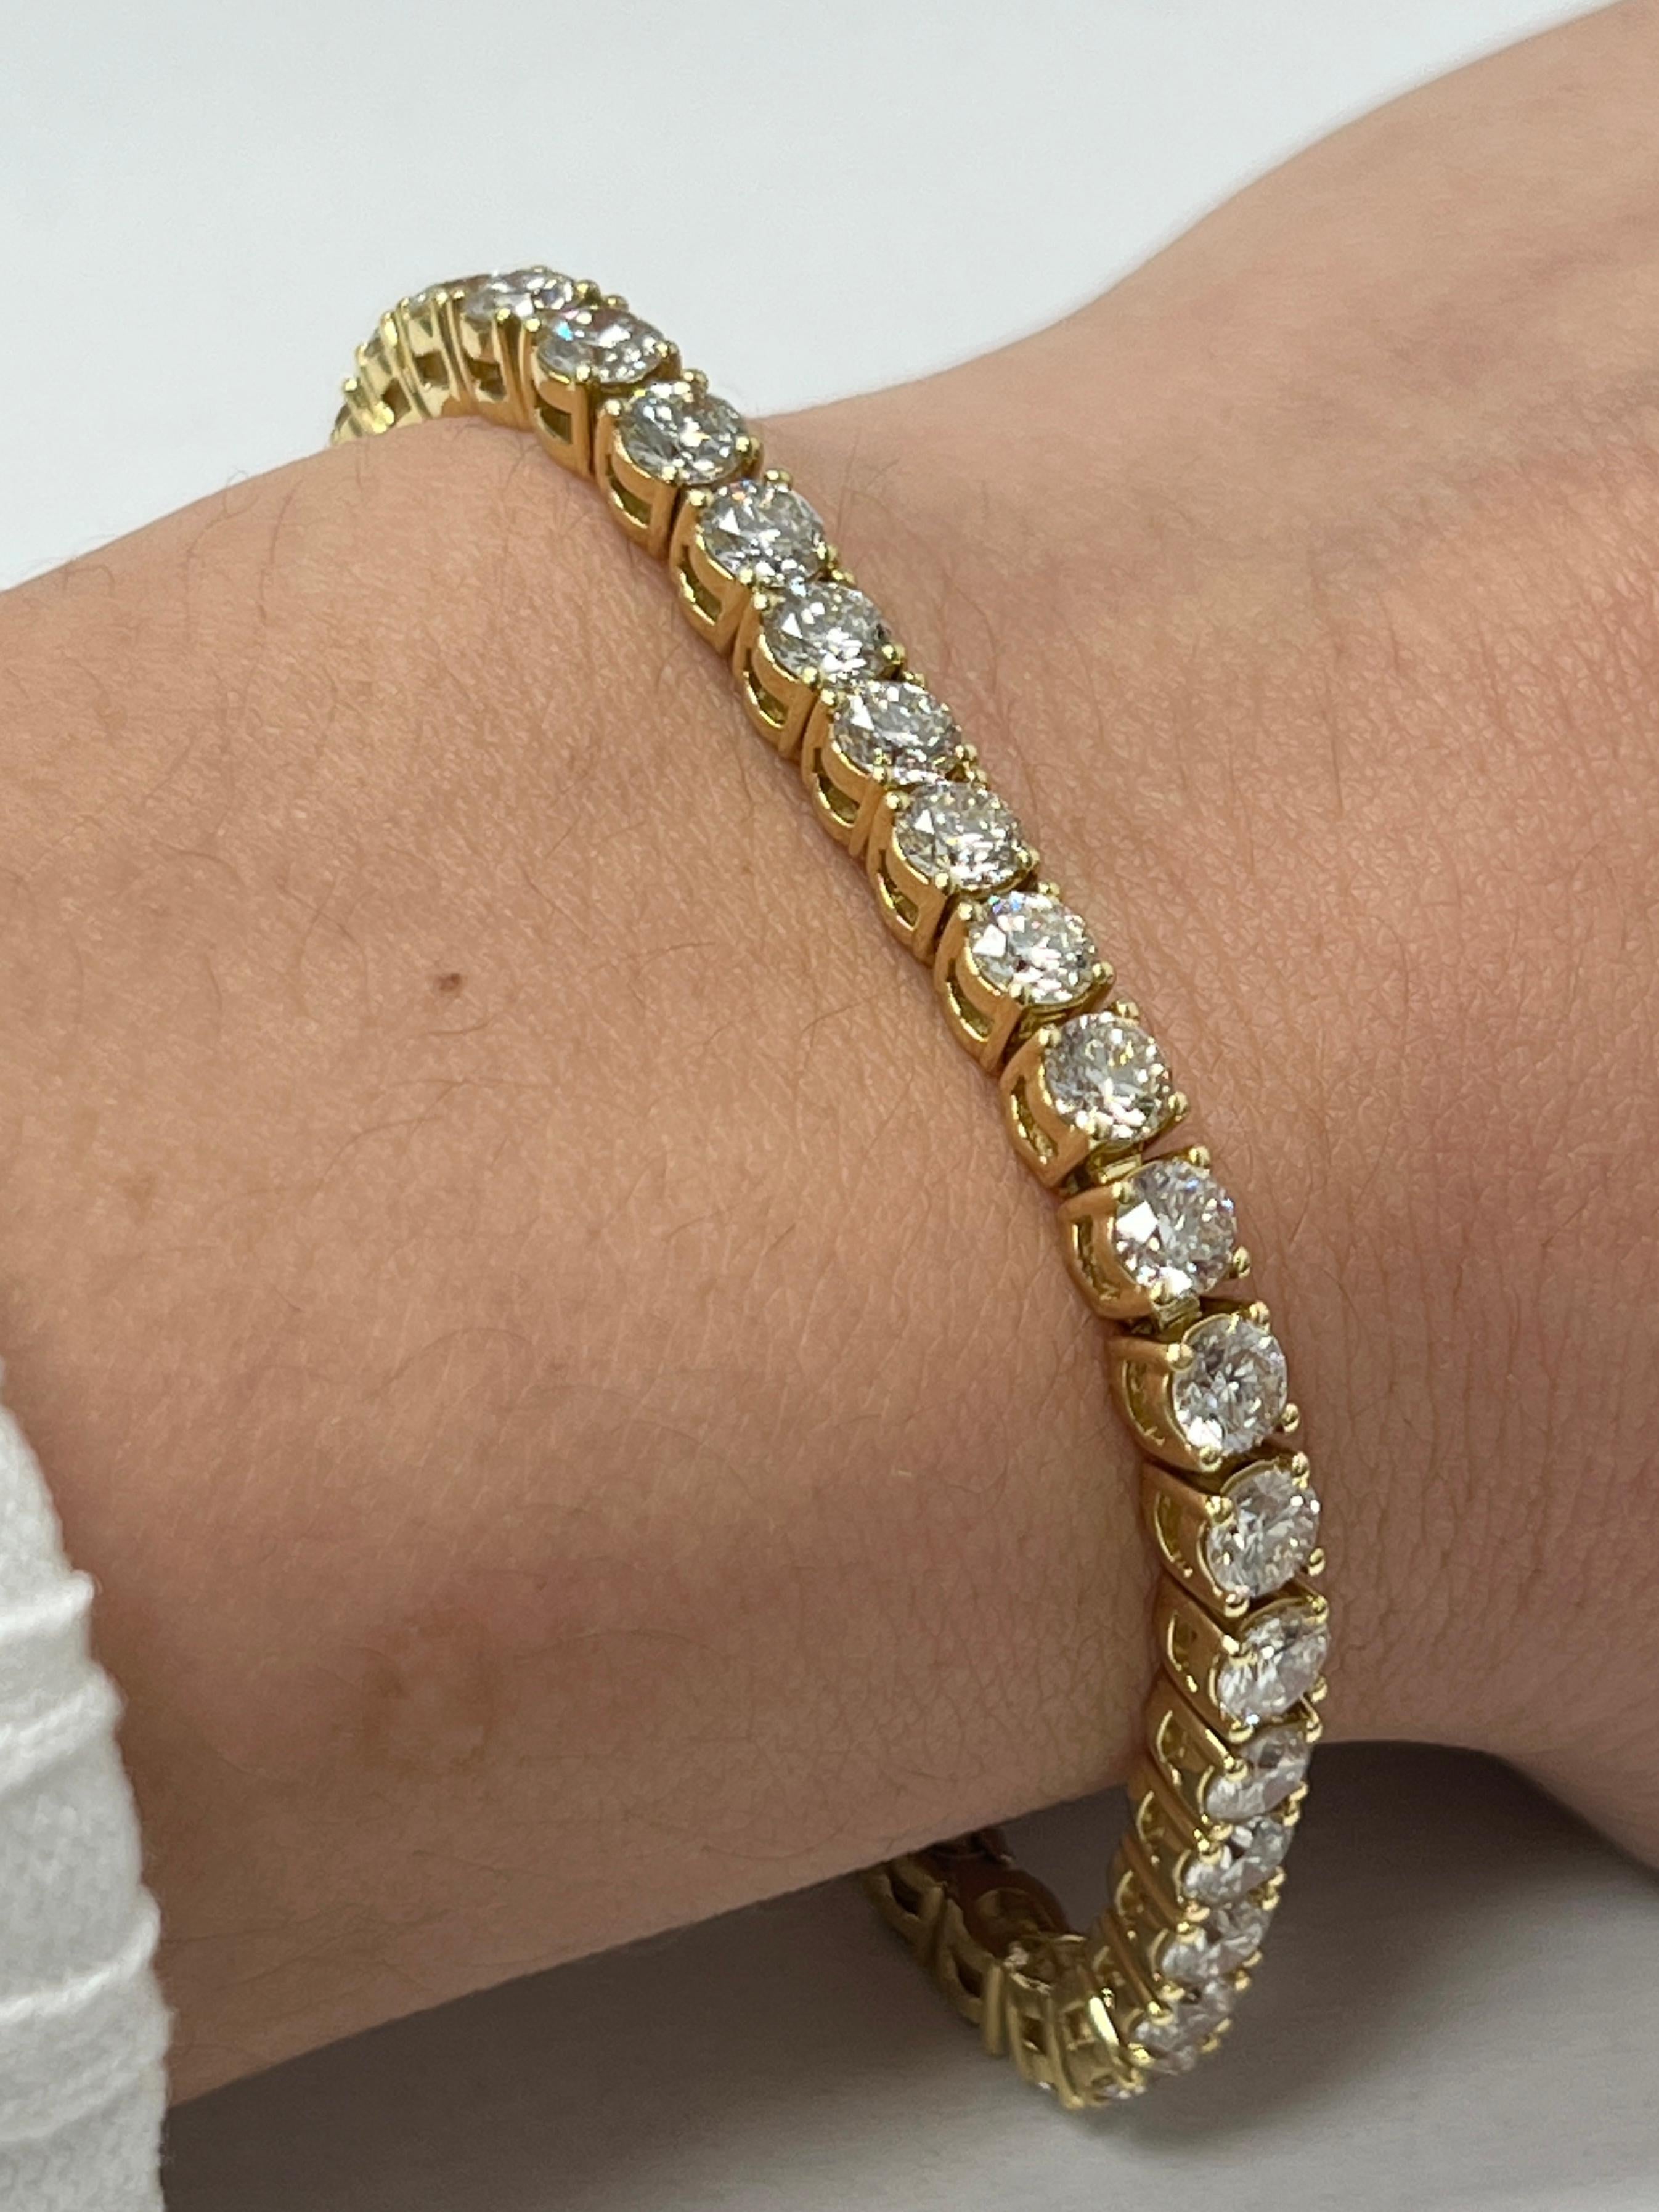 Fashion and glam are at the forefront with this exquisite diamond bracelet. This 14-karat yellow gold diamond bracelet is made from 17 grams of gold. The top is adorned with one row of I-J color, VS/SI clarity diamonds. This bracelet carries 42